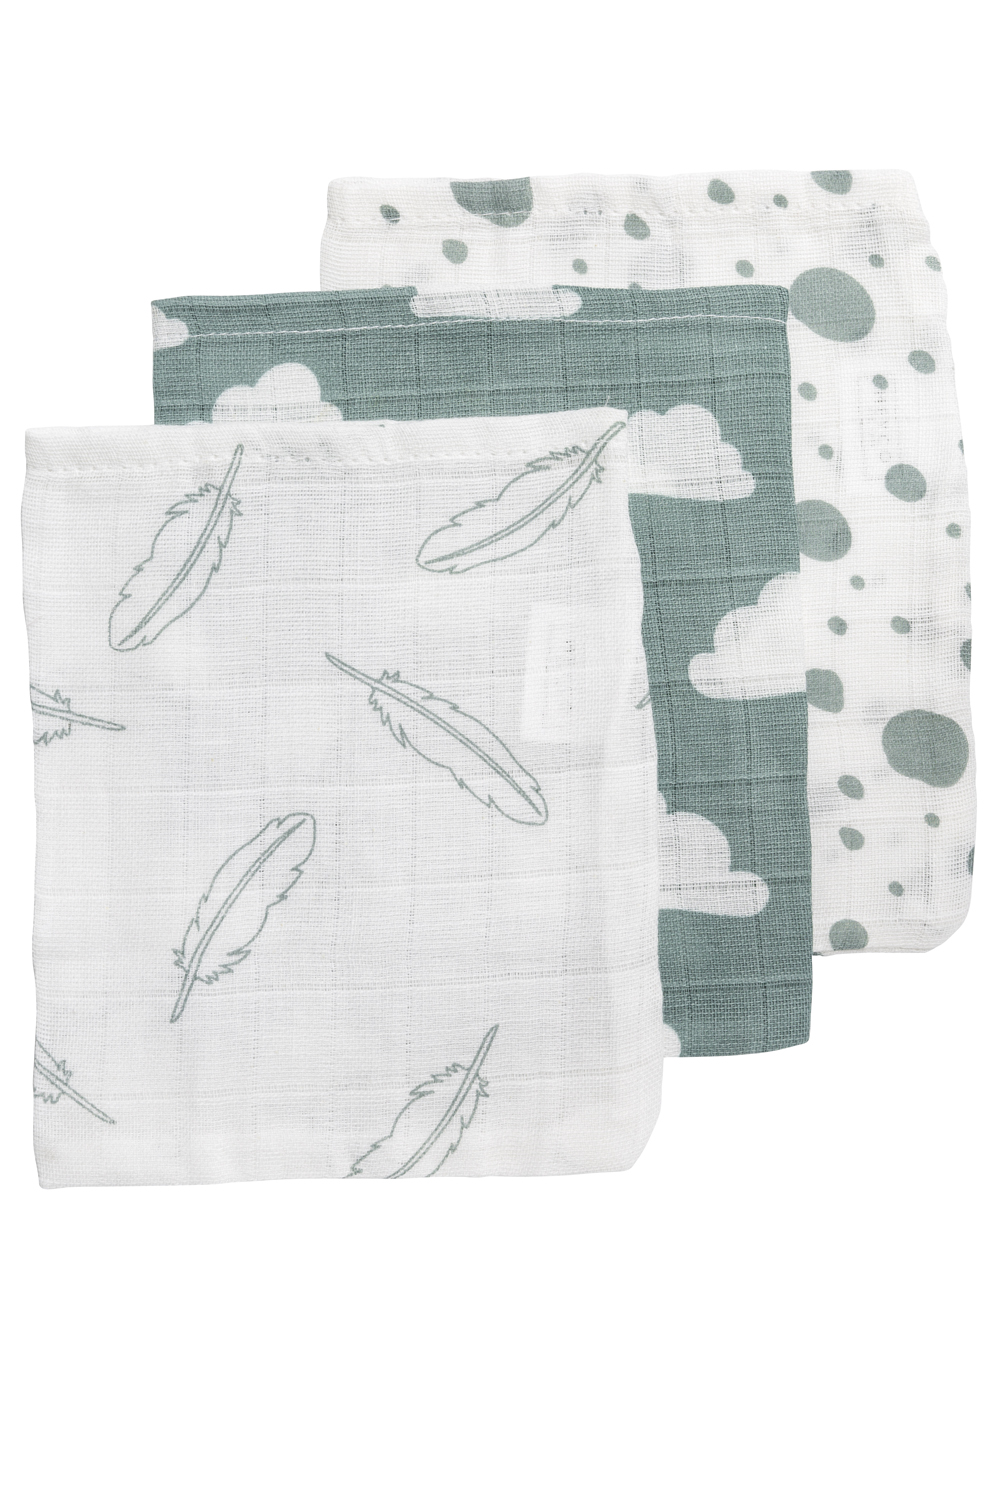 Washcloth 3-pack muslin Clouds/Dots/Feathers - stone green - 20x17cm